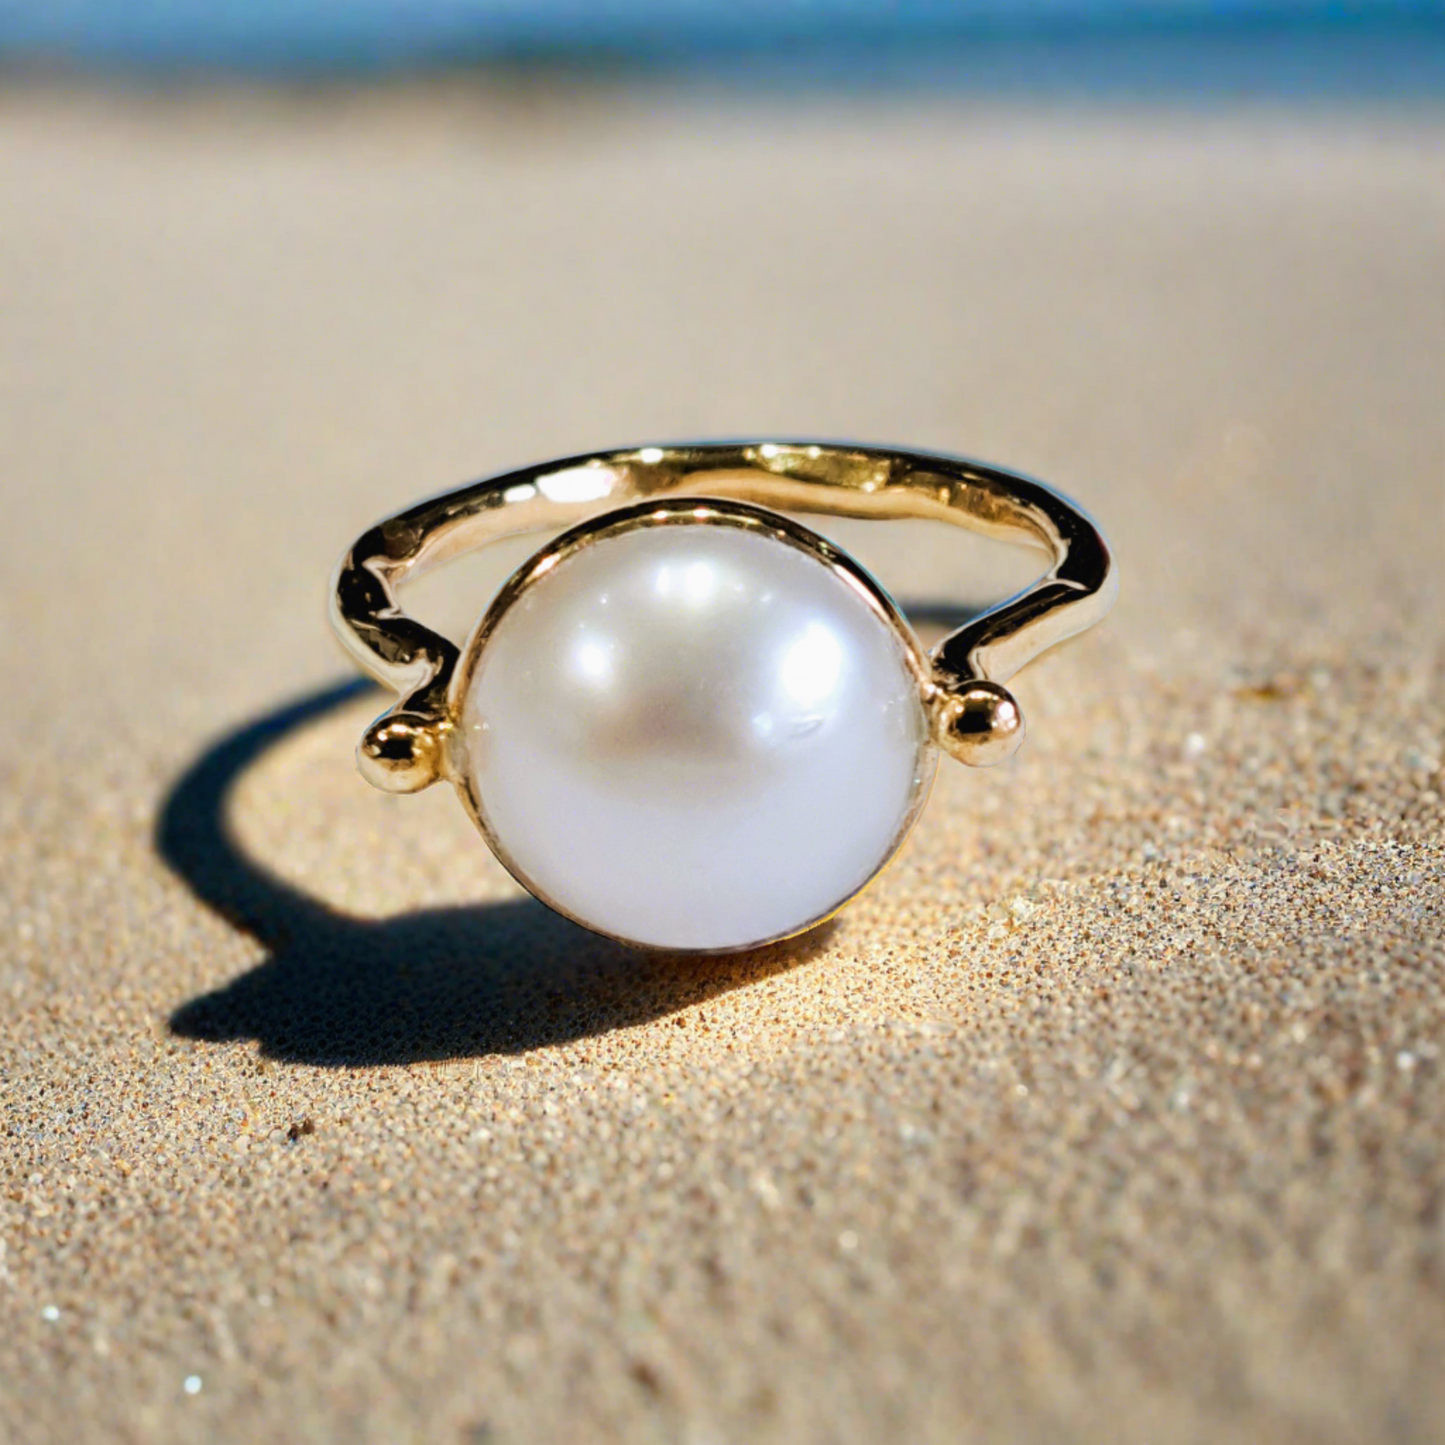 Pearl ring- goldplated sterling silver